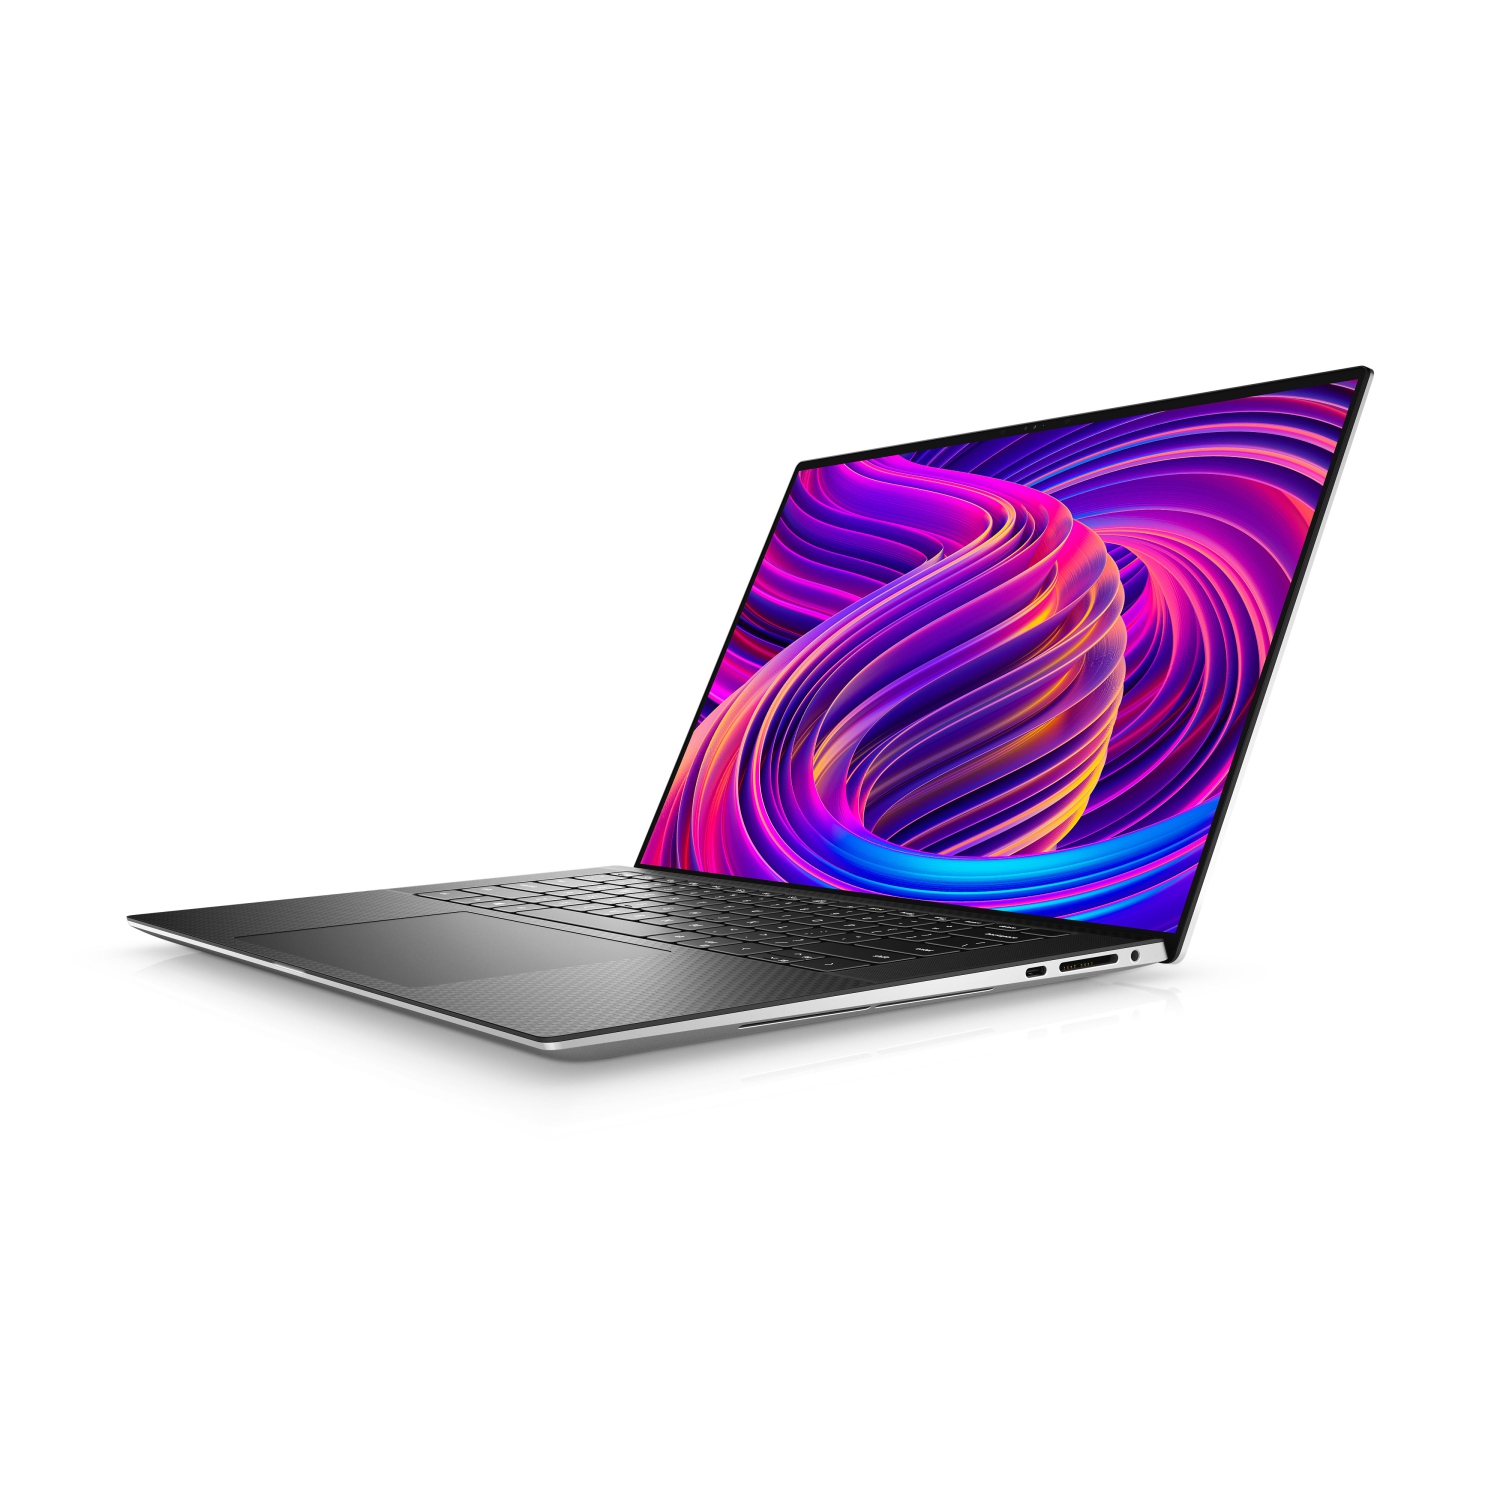 Refurbished (Excellent) - Dell XPS 15 9510 Laptop (2021) | 15.6" FHD+ | Core i7 - 512GB SSD - 64GB RAM - 3050 Ti | 8 Cores @ 4.6 GHz - 11th Gen CPU Certified Refurbished